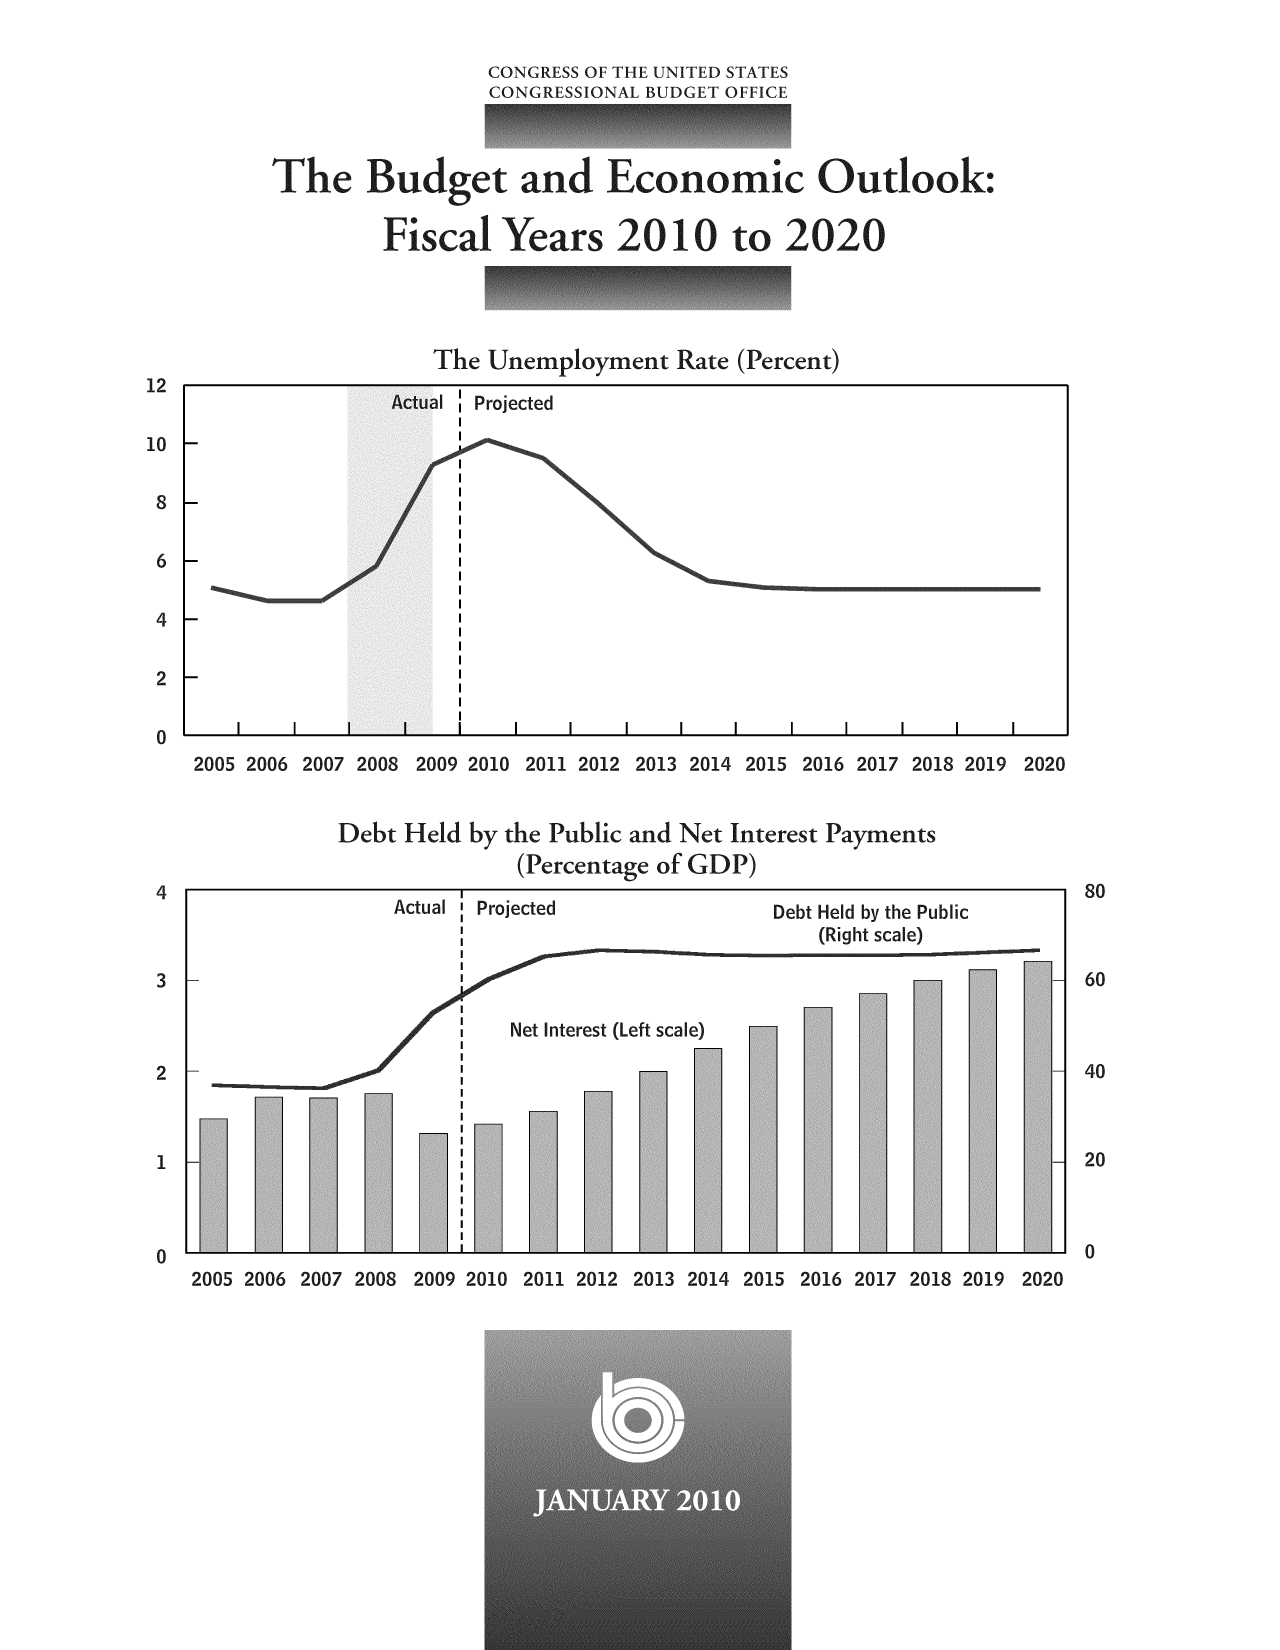 handle is hein.congrec/cbo8577 and id is 1 raw text is: ST
0

IS

Tie Budget and Economic Outlook.
Fiscal Years 2010 to 2020

Lemployment Rate (Percent)

I          I          I           I

11 2012 201 3      d14 201!

Debt Held

the Pub
(Percen

lic and Net InterestP
tage of GDP)

Actual   Projected                       Debt Held by the Public
(Right scale)
I    N        s(L    s
-1 1                                                                  1             -'

ments

ONGRESS OF

he

12
10
8
6
4

I                          I

Qo

3
1

4

I                      I                    I                      I                     I                    I                      I                     I                     I                     I                     I

Pro

)18 2019 202(

111

13 2014

Uo


